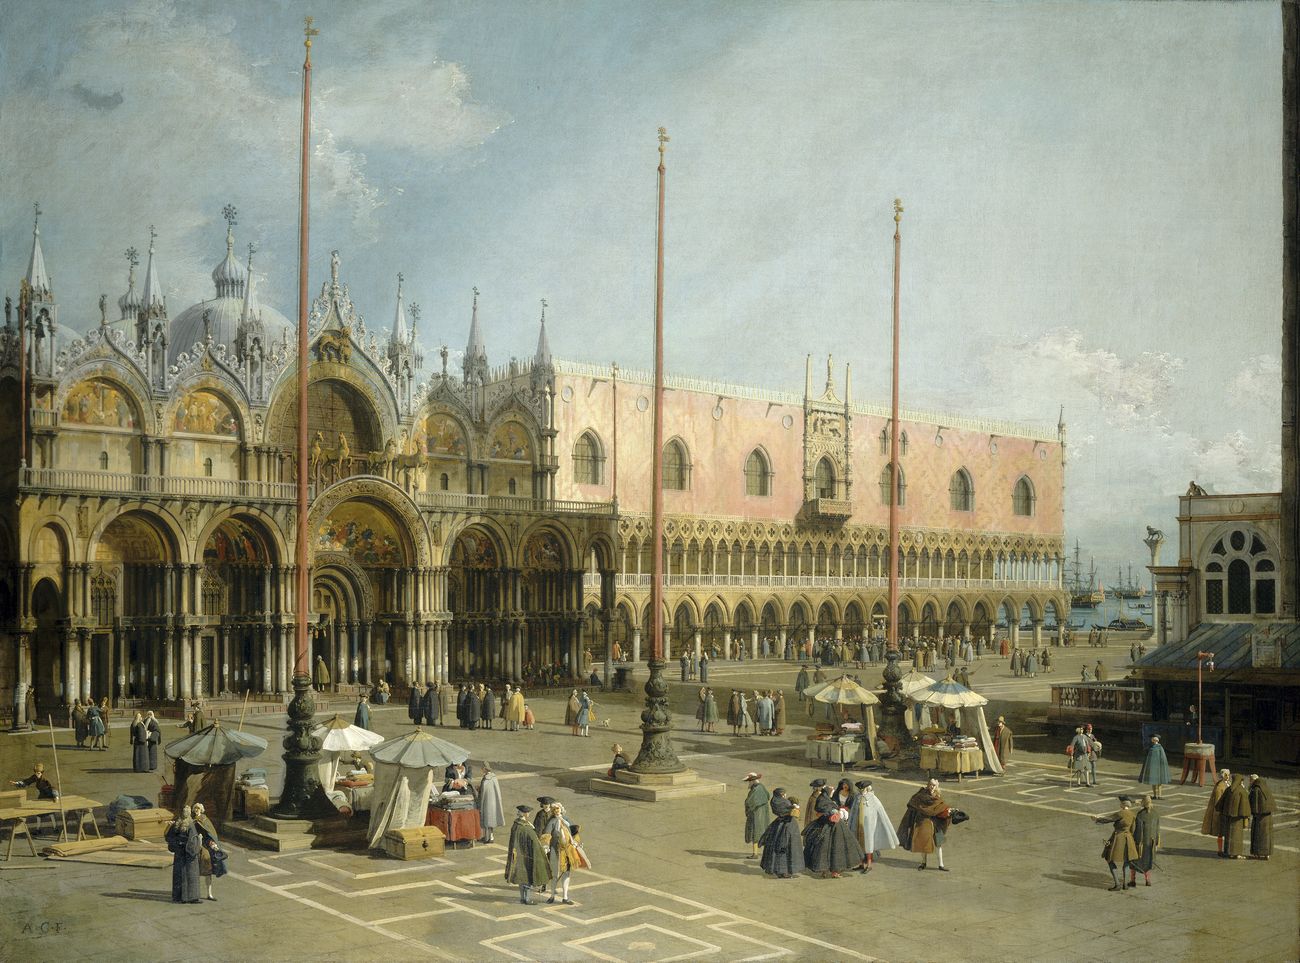   Canaletto  Piazza San Marco verso est Image: © National Gallery of Art, Washington 